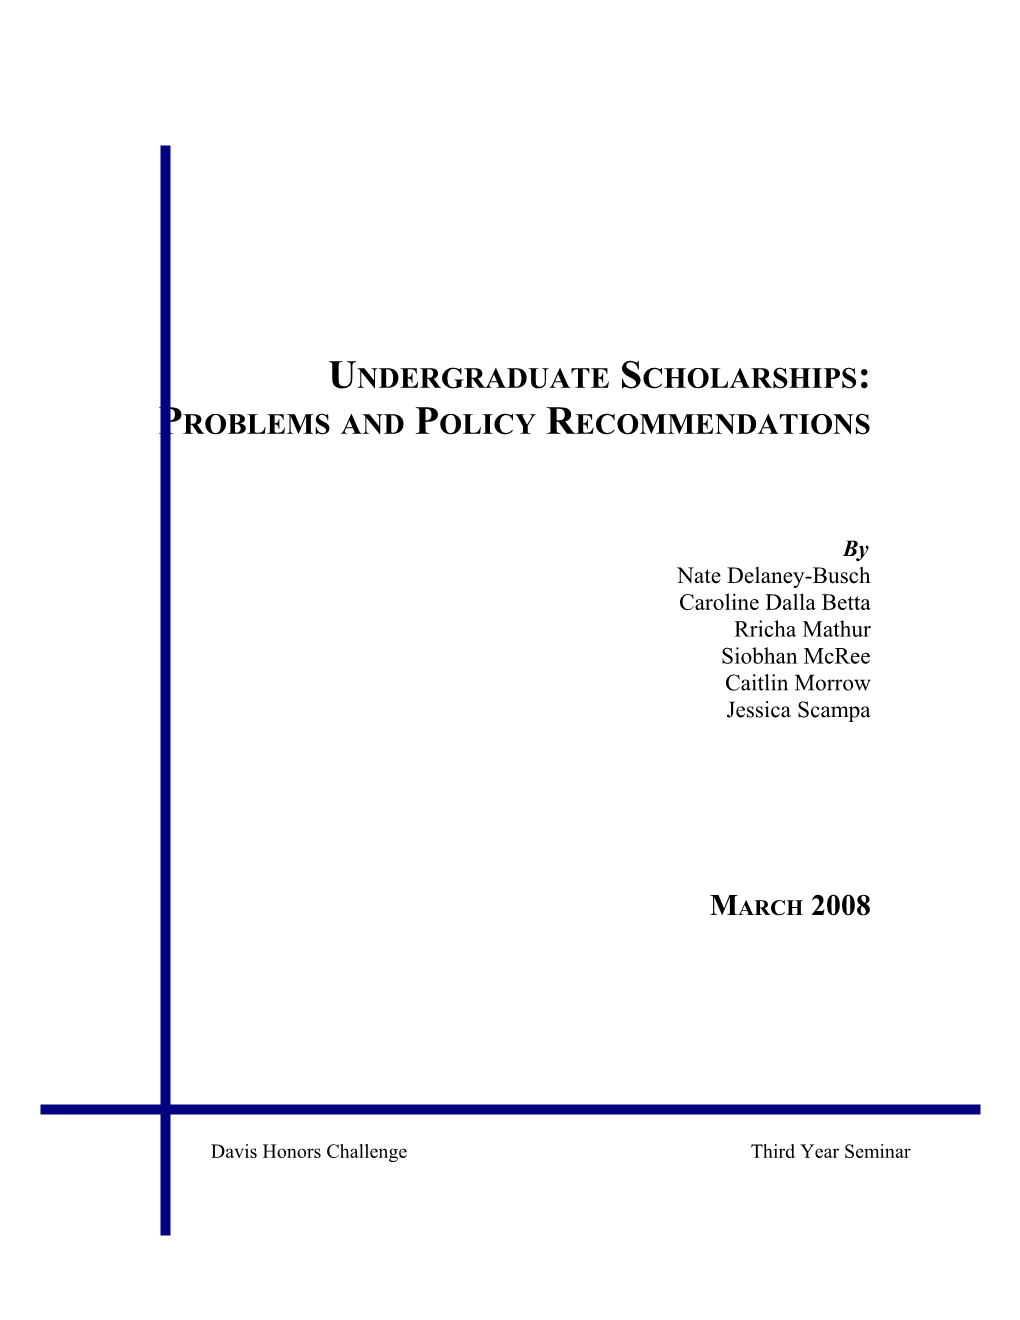 Undergraduate Scholarships: Problems and Policy Recommendations